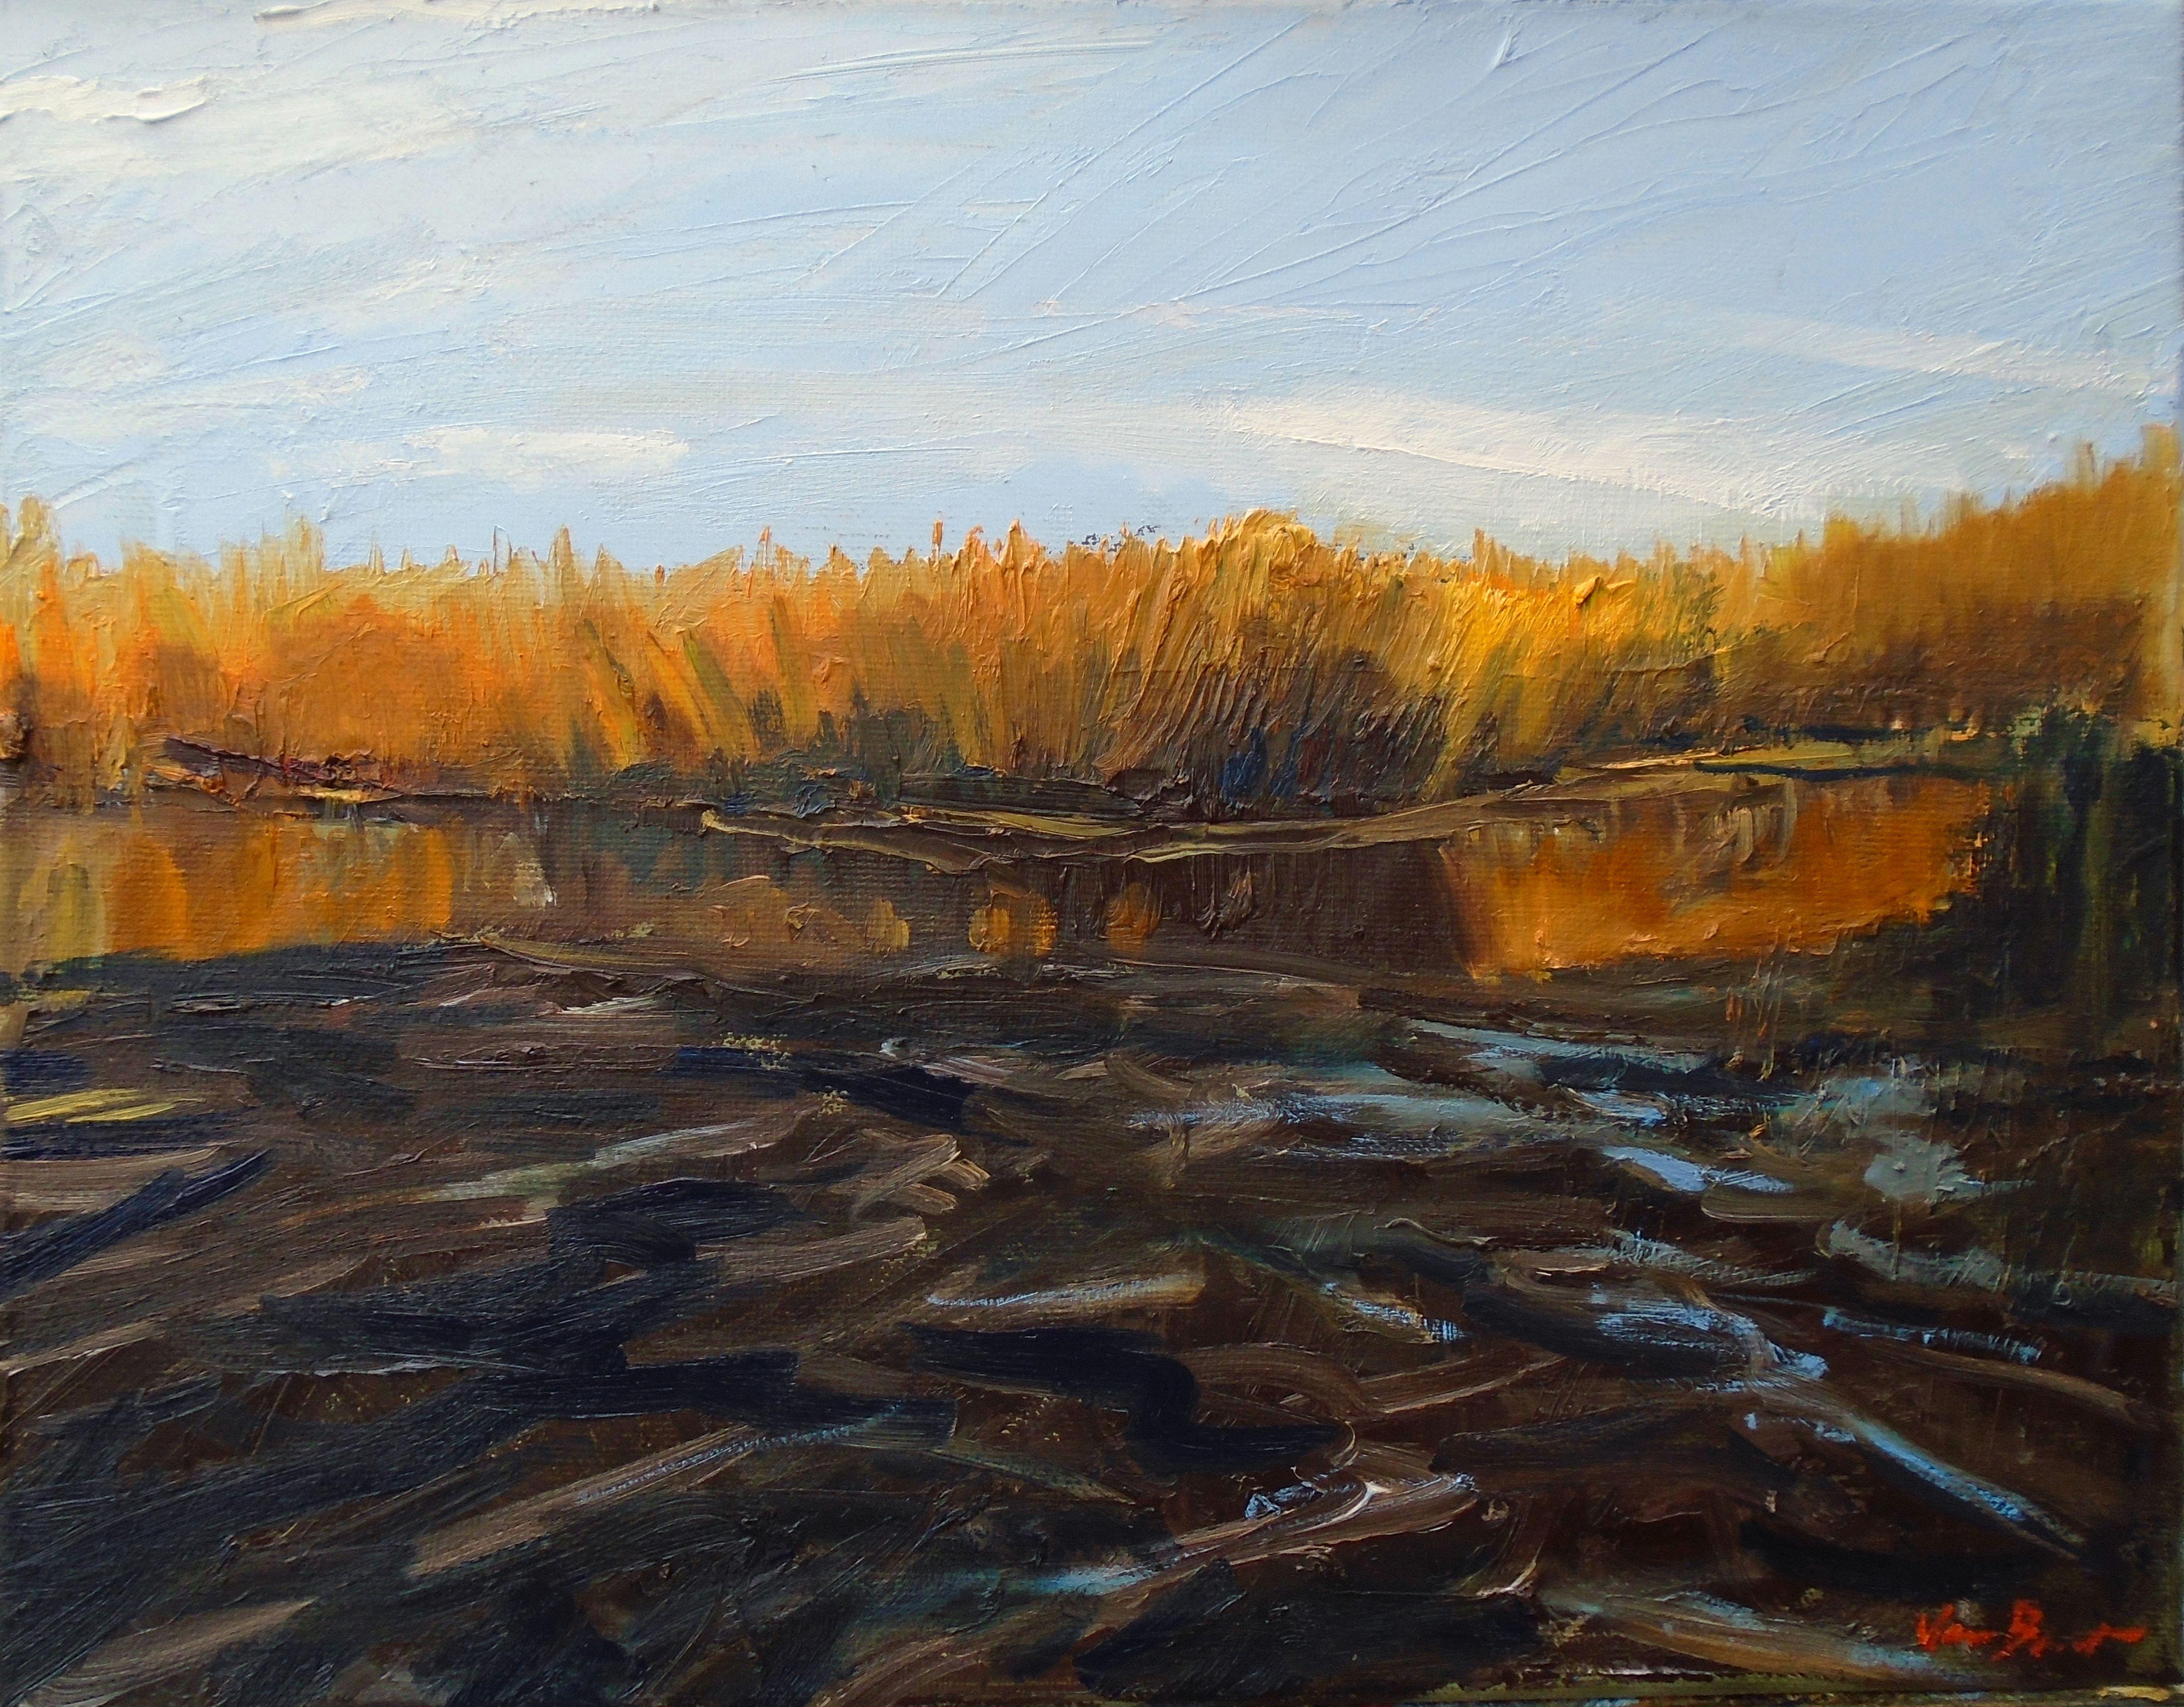 A painting done in January at Wertheim National Wildlife Refuge in Eastern Long Island. Using mostly a palette knife,  I wanted to capture the late day effect on the sun on the orange marsh grass and show the contrast between the stiff grasses and